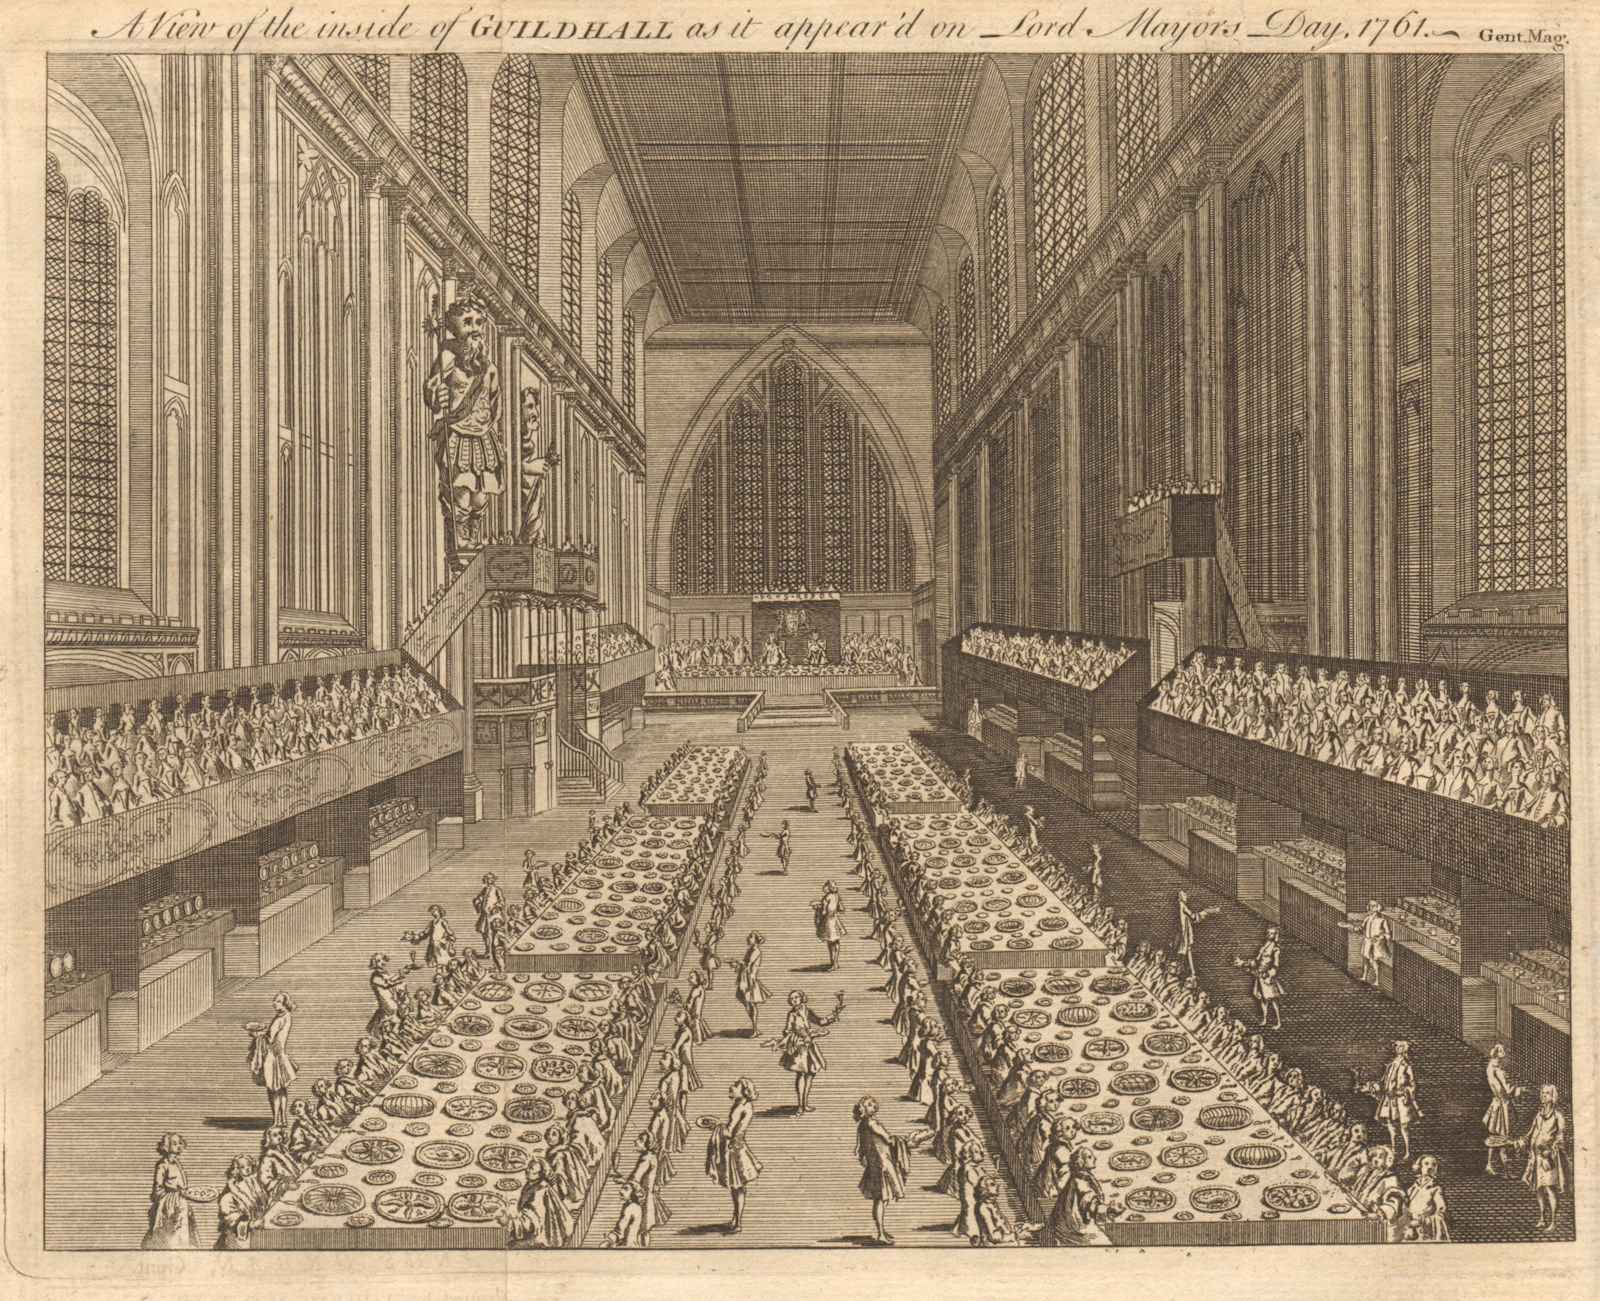 Associate Product The inside of Guildhall as it appeared on Lord Mayors Day, 1761. London 1761